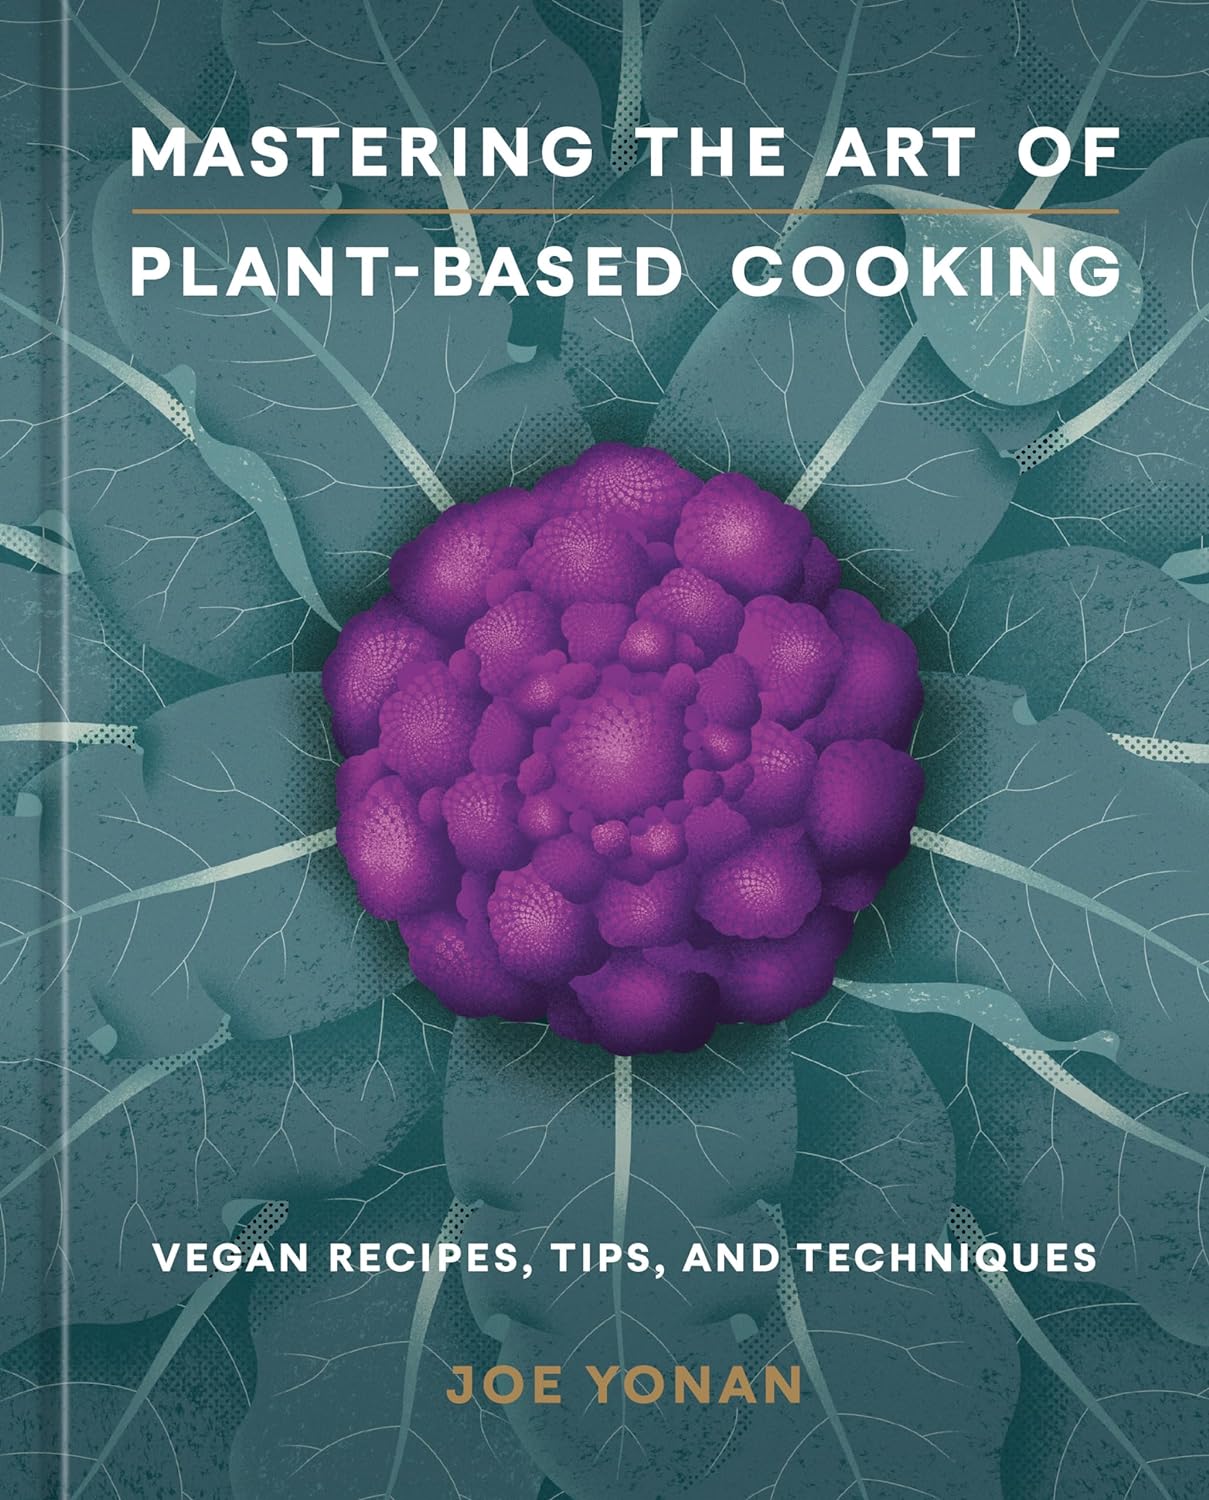 *Pre-order* Mastering the Art of Plant-Based Cooking: Vegan Recipes, Tips, and Techniques (Joe Yonan)